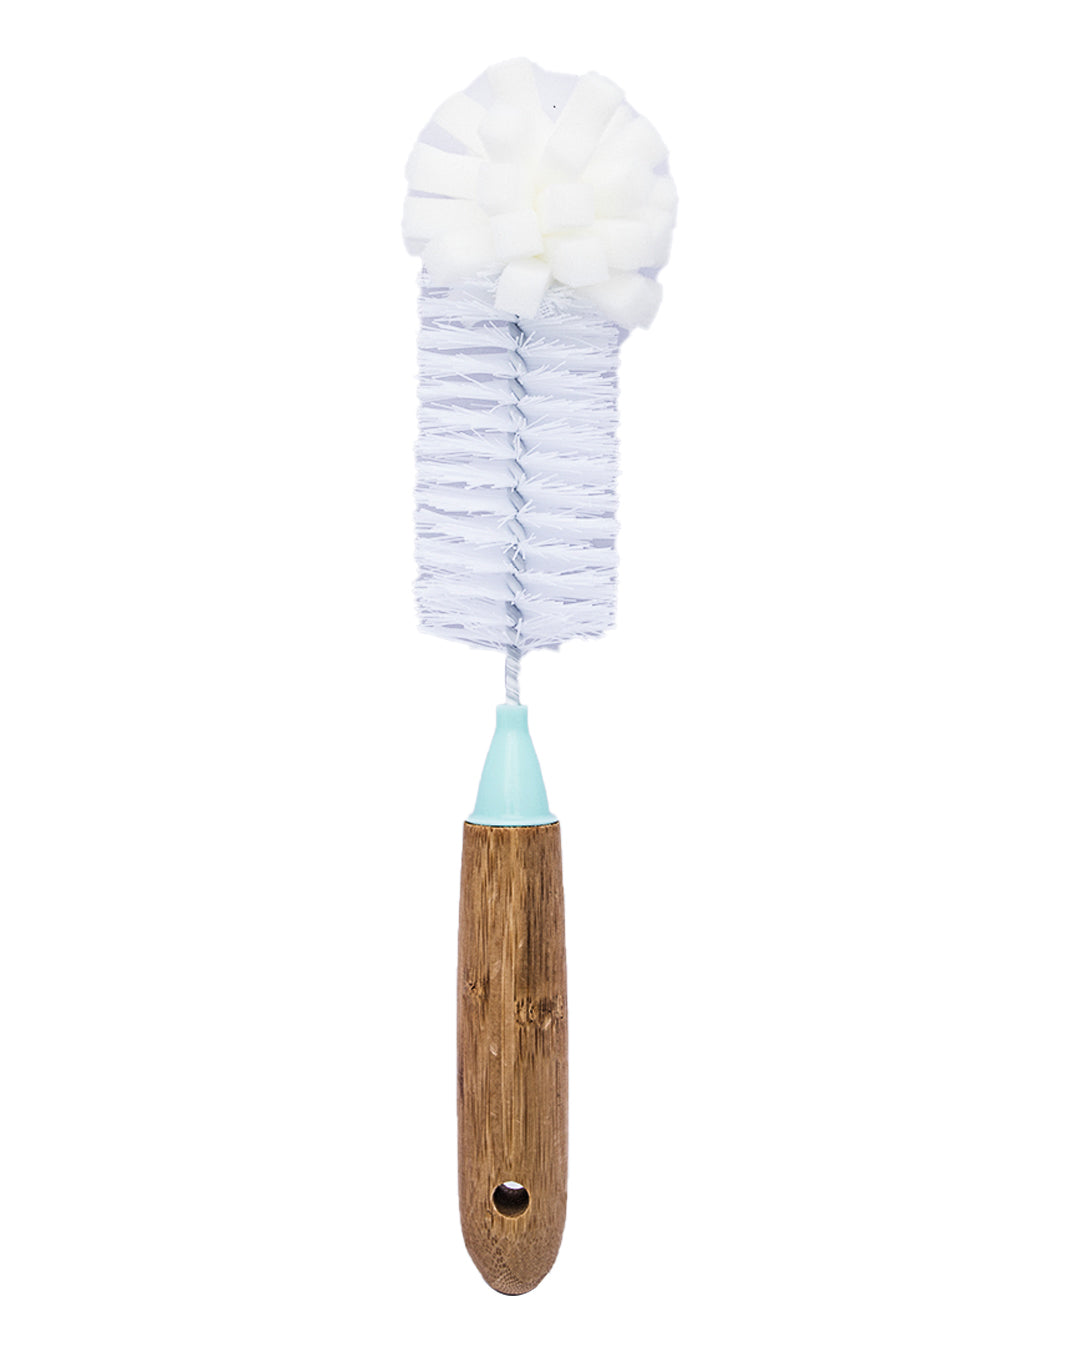 VON CASA Bottle Cleaning Brush, with Bamboo Handle & Foam End